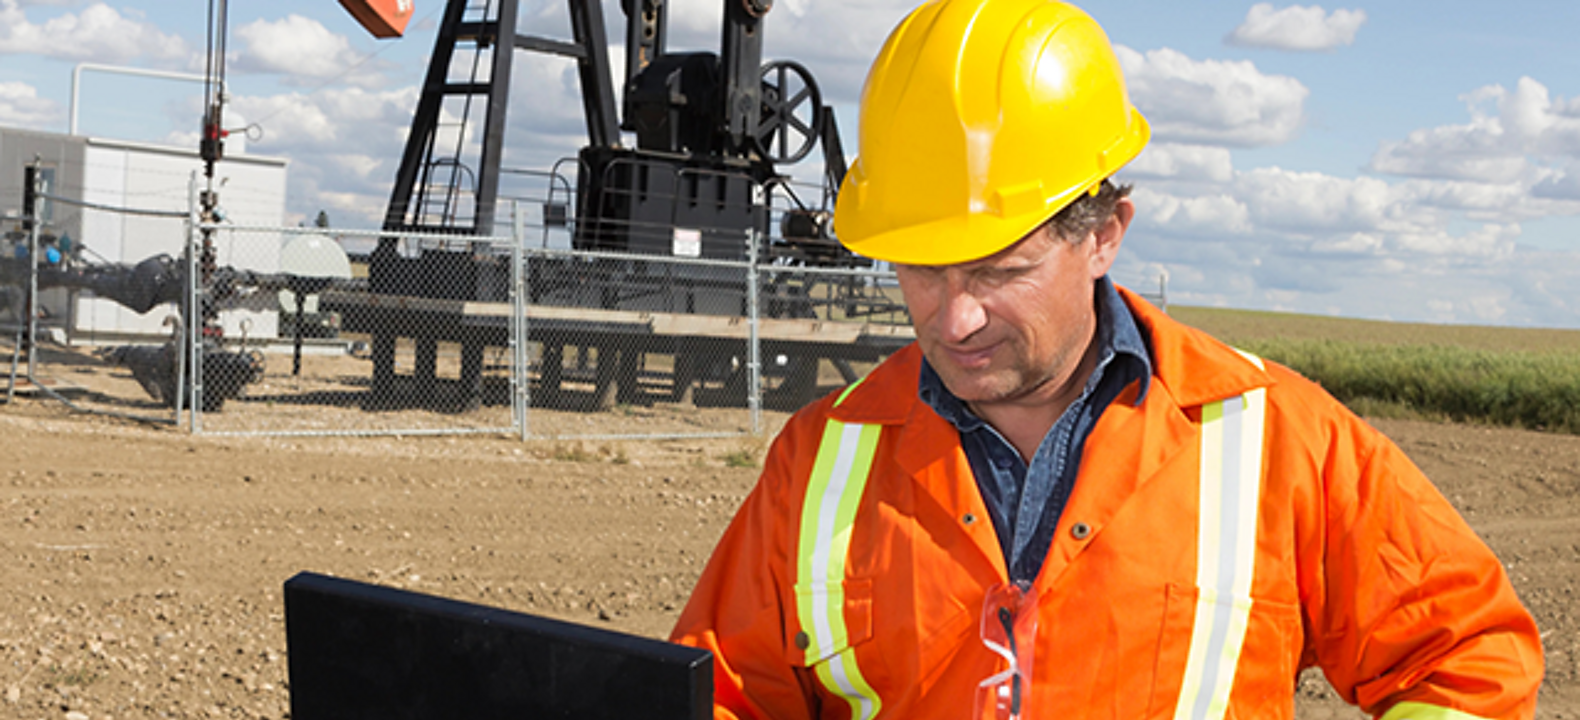 An oil worker checks his laptop at a pumpjack site.